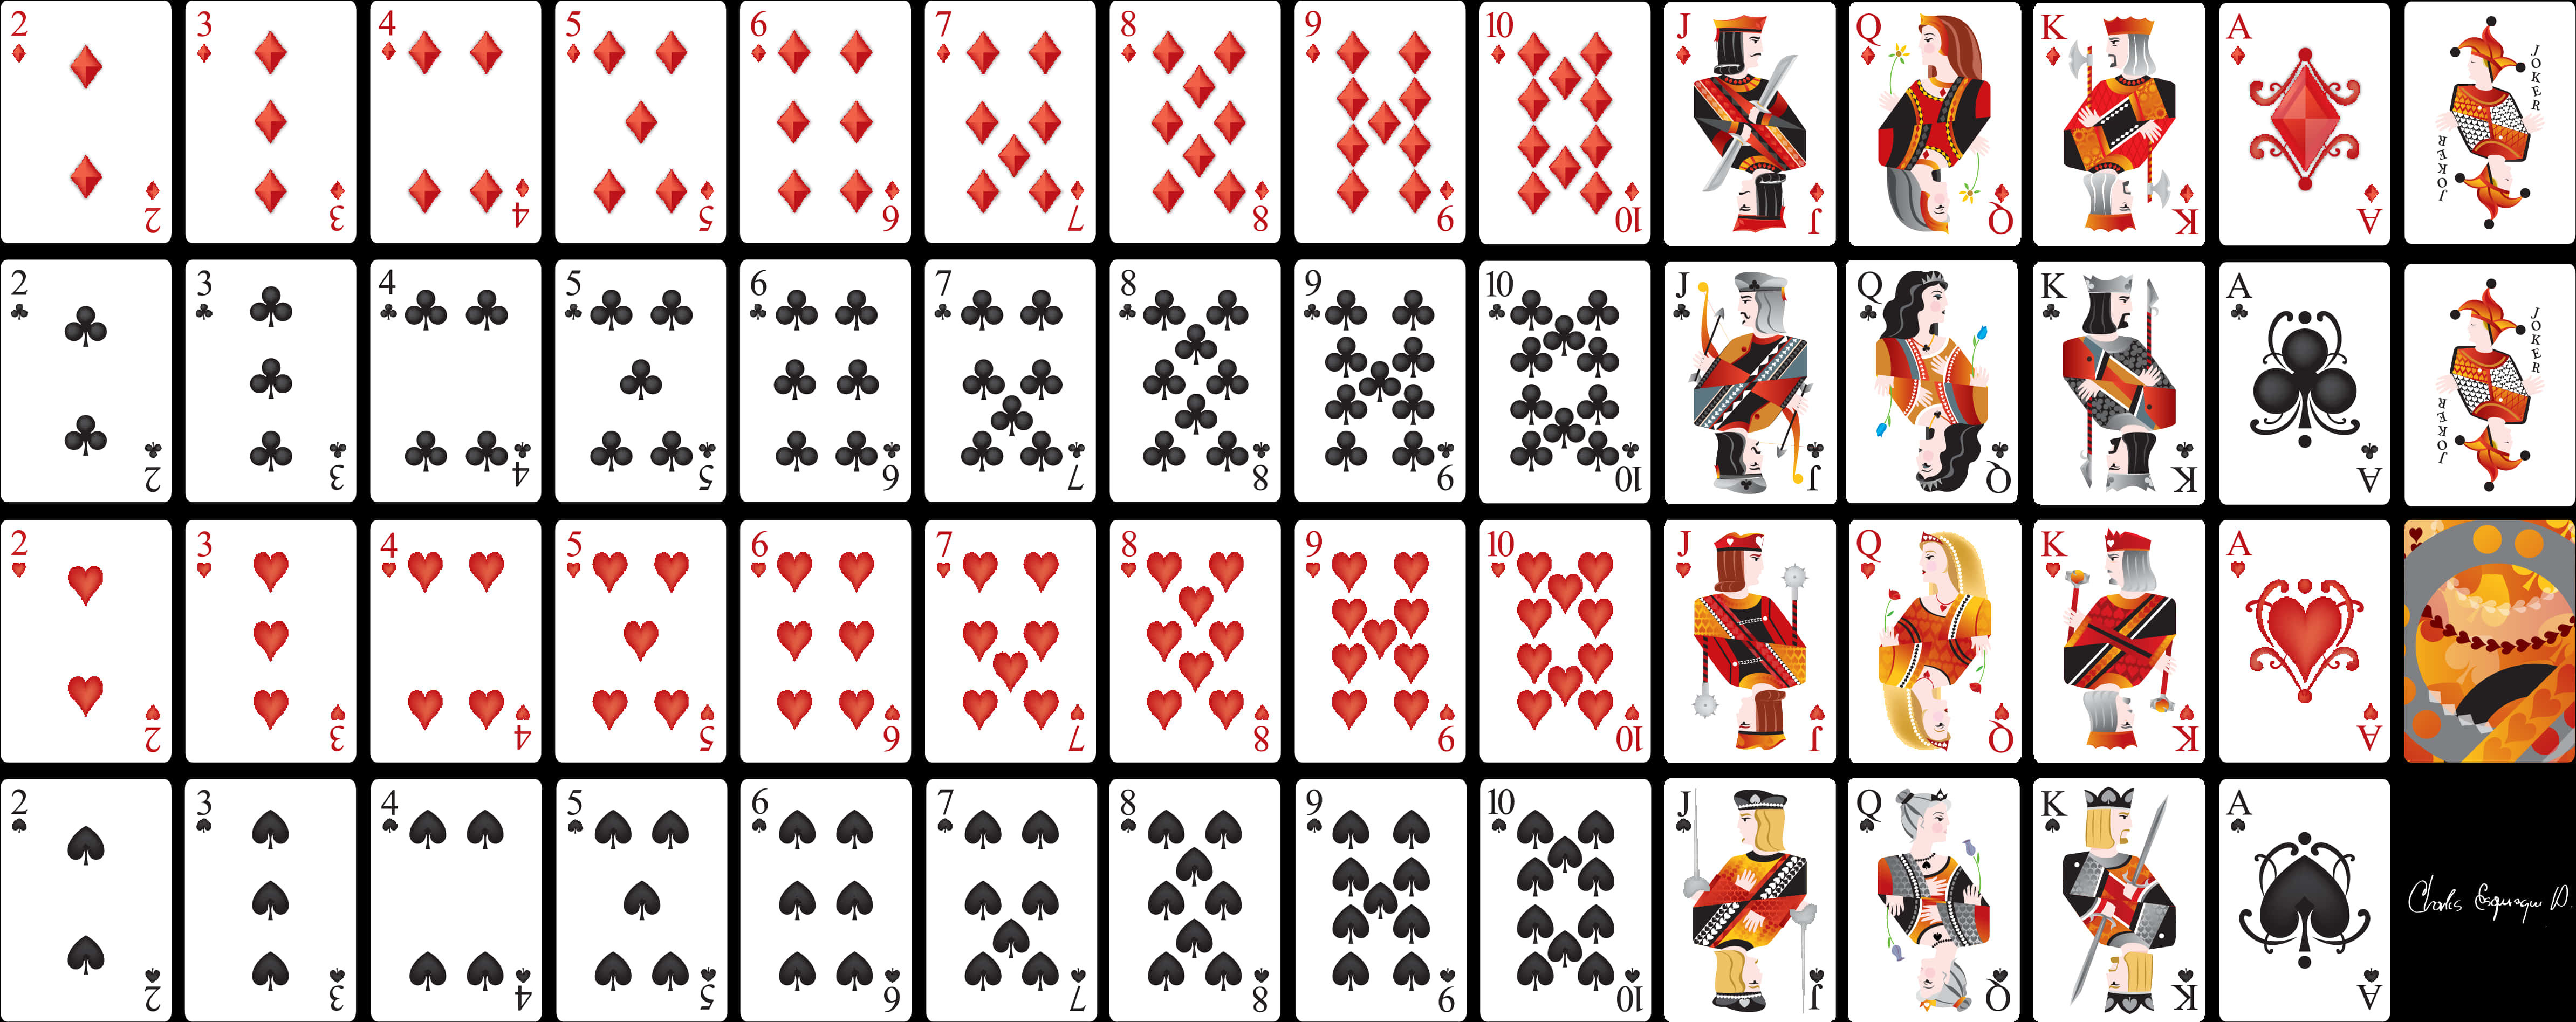 Complete Deckof Playing Cards PNG